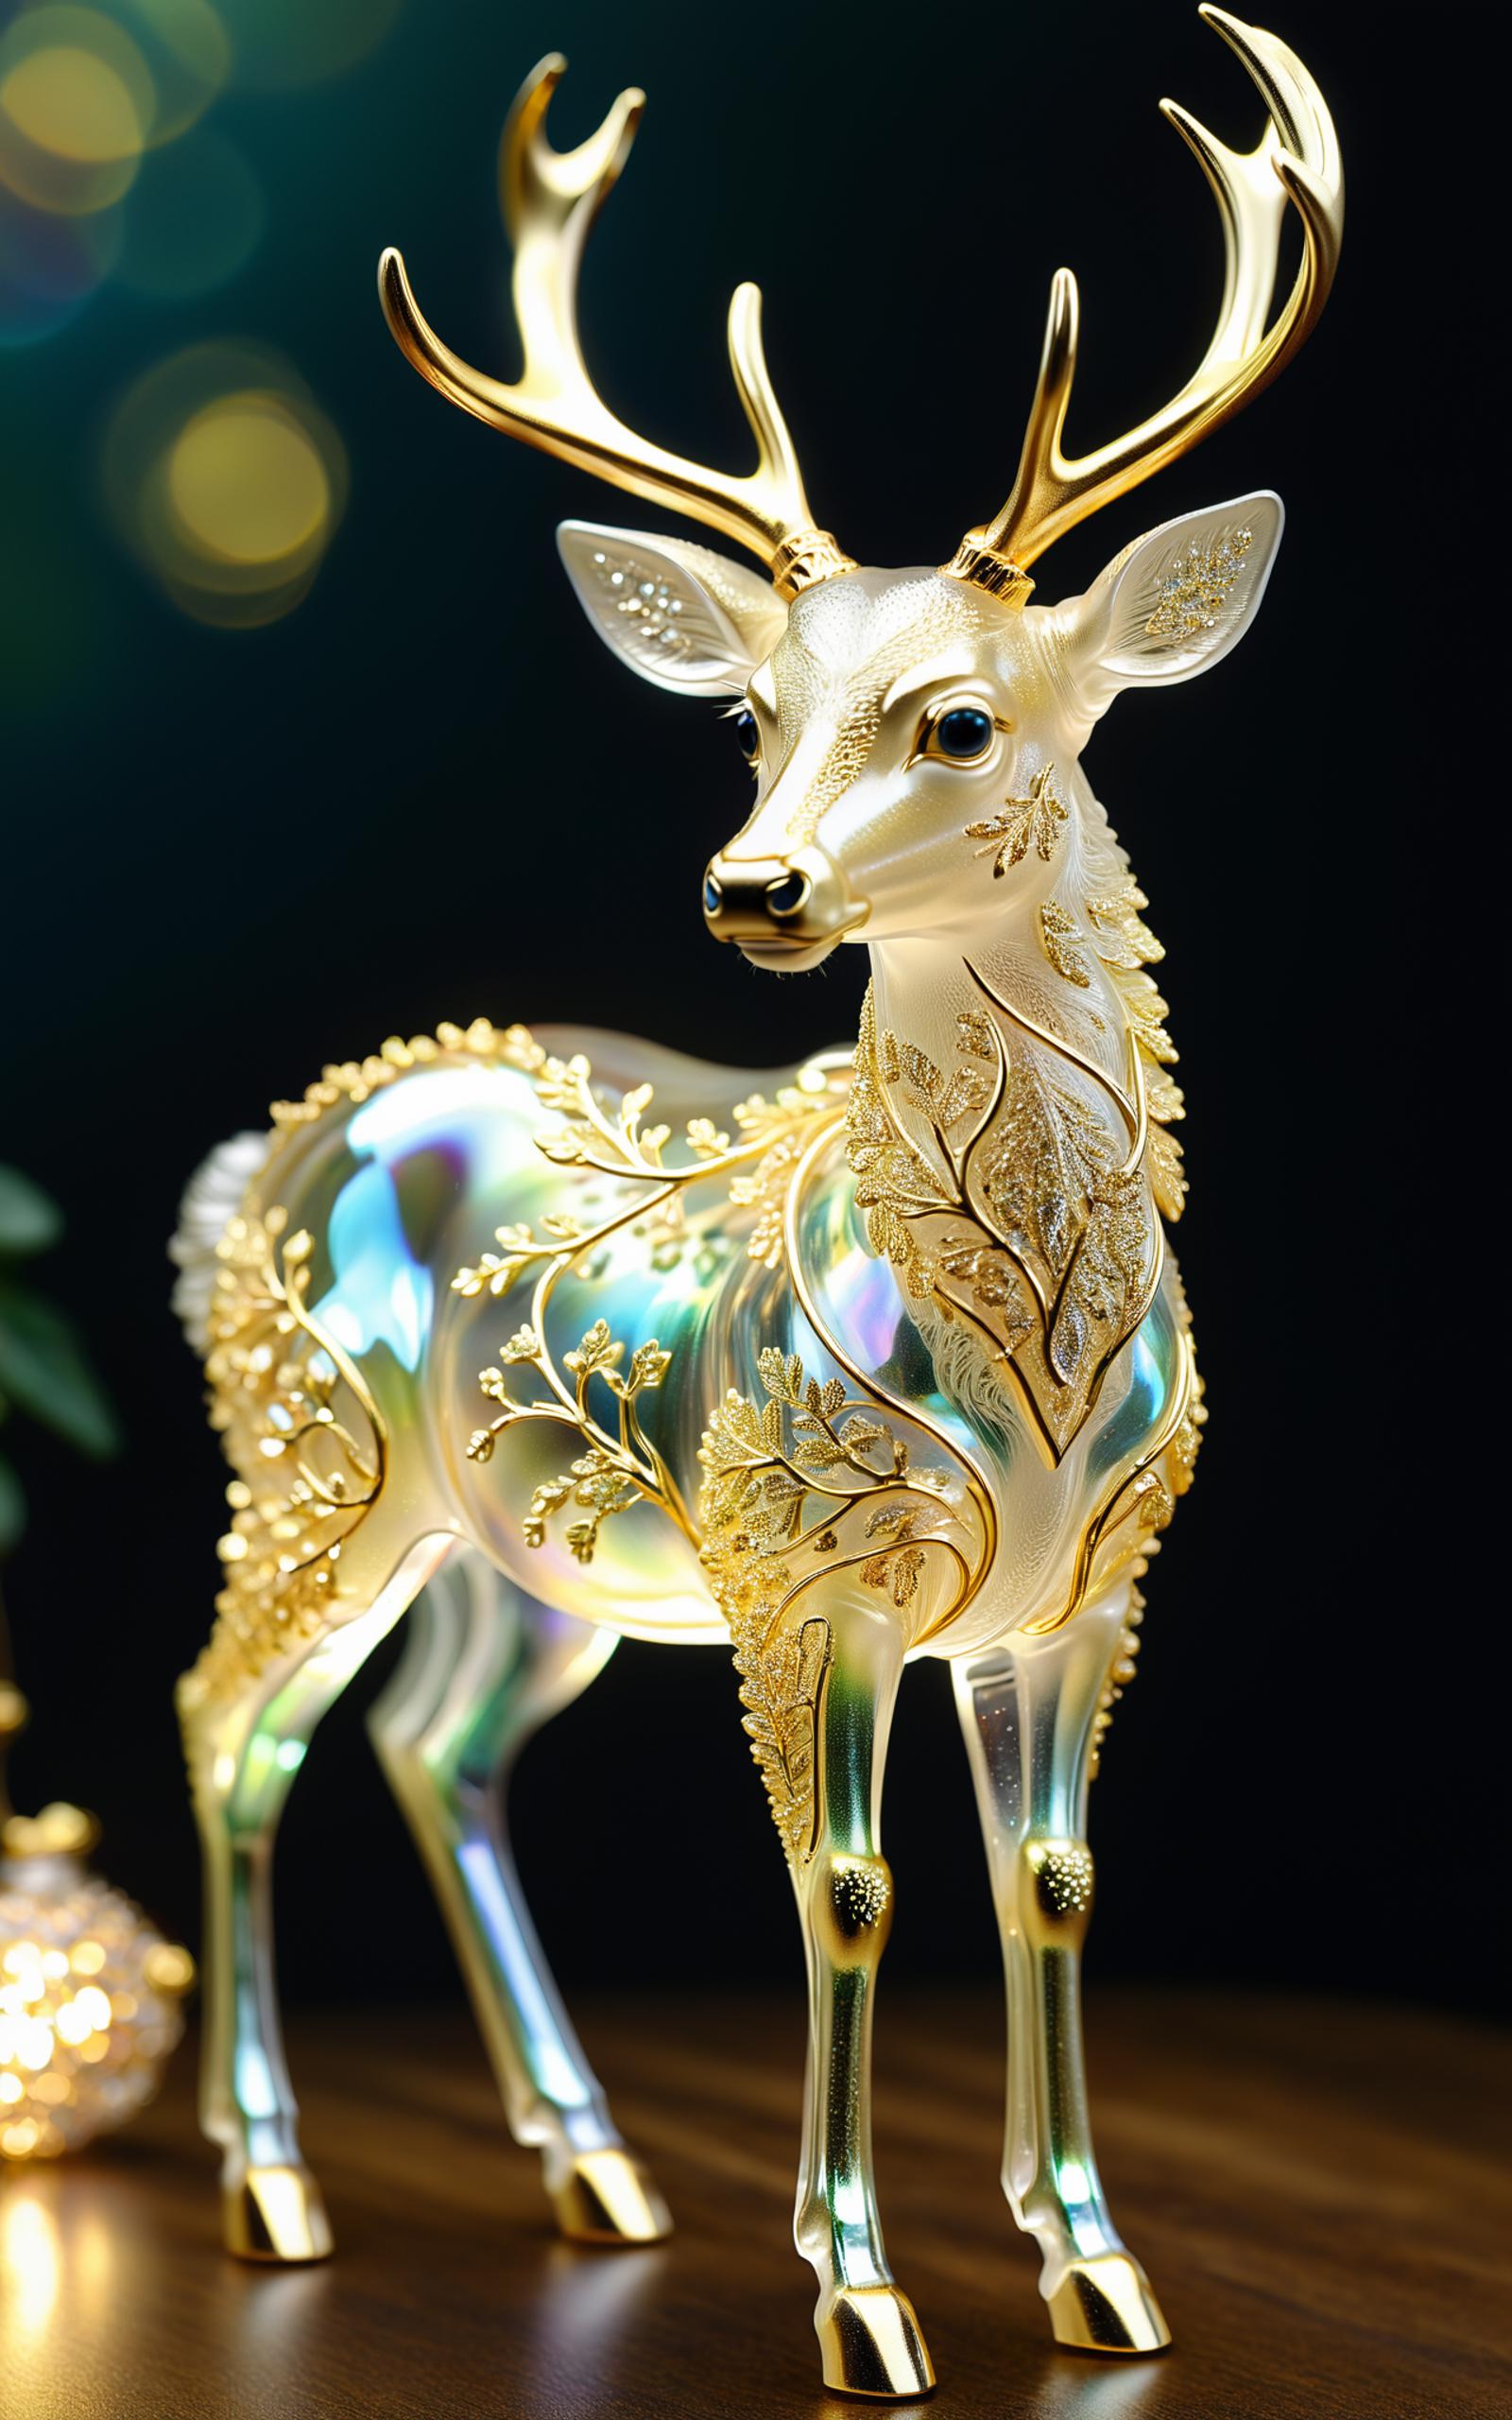 A Glass Deer Sculpture with Gold and Painted Accents